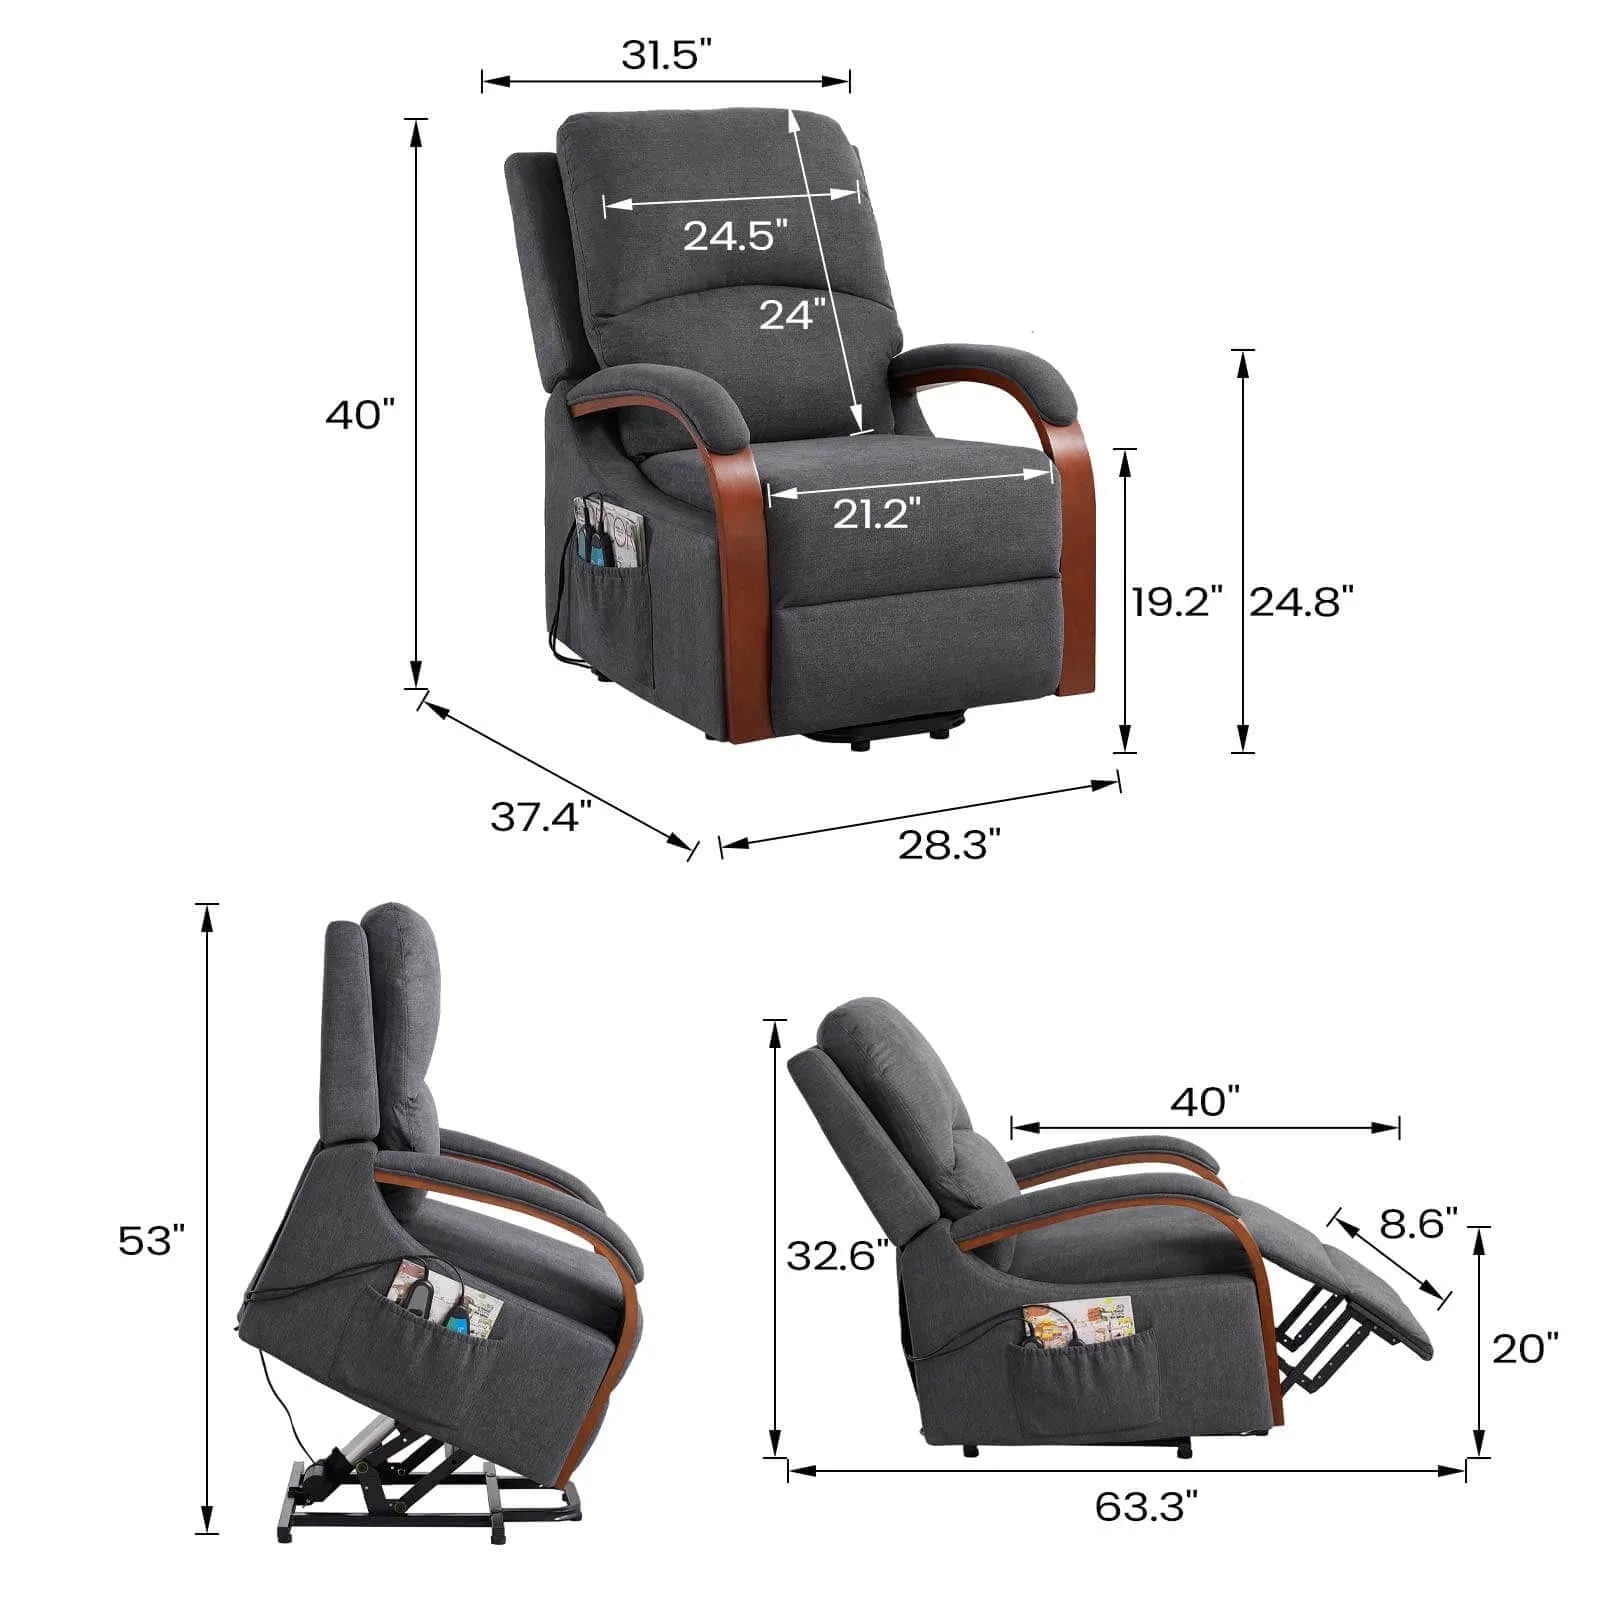 size of power lift reclienr chairs